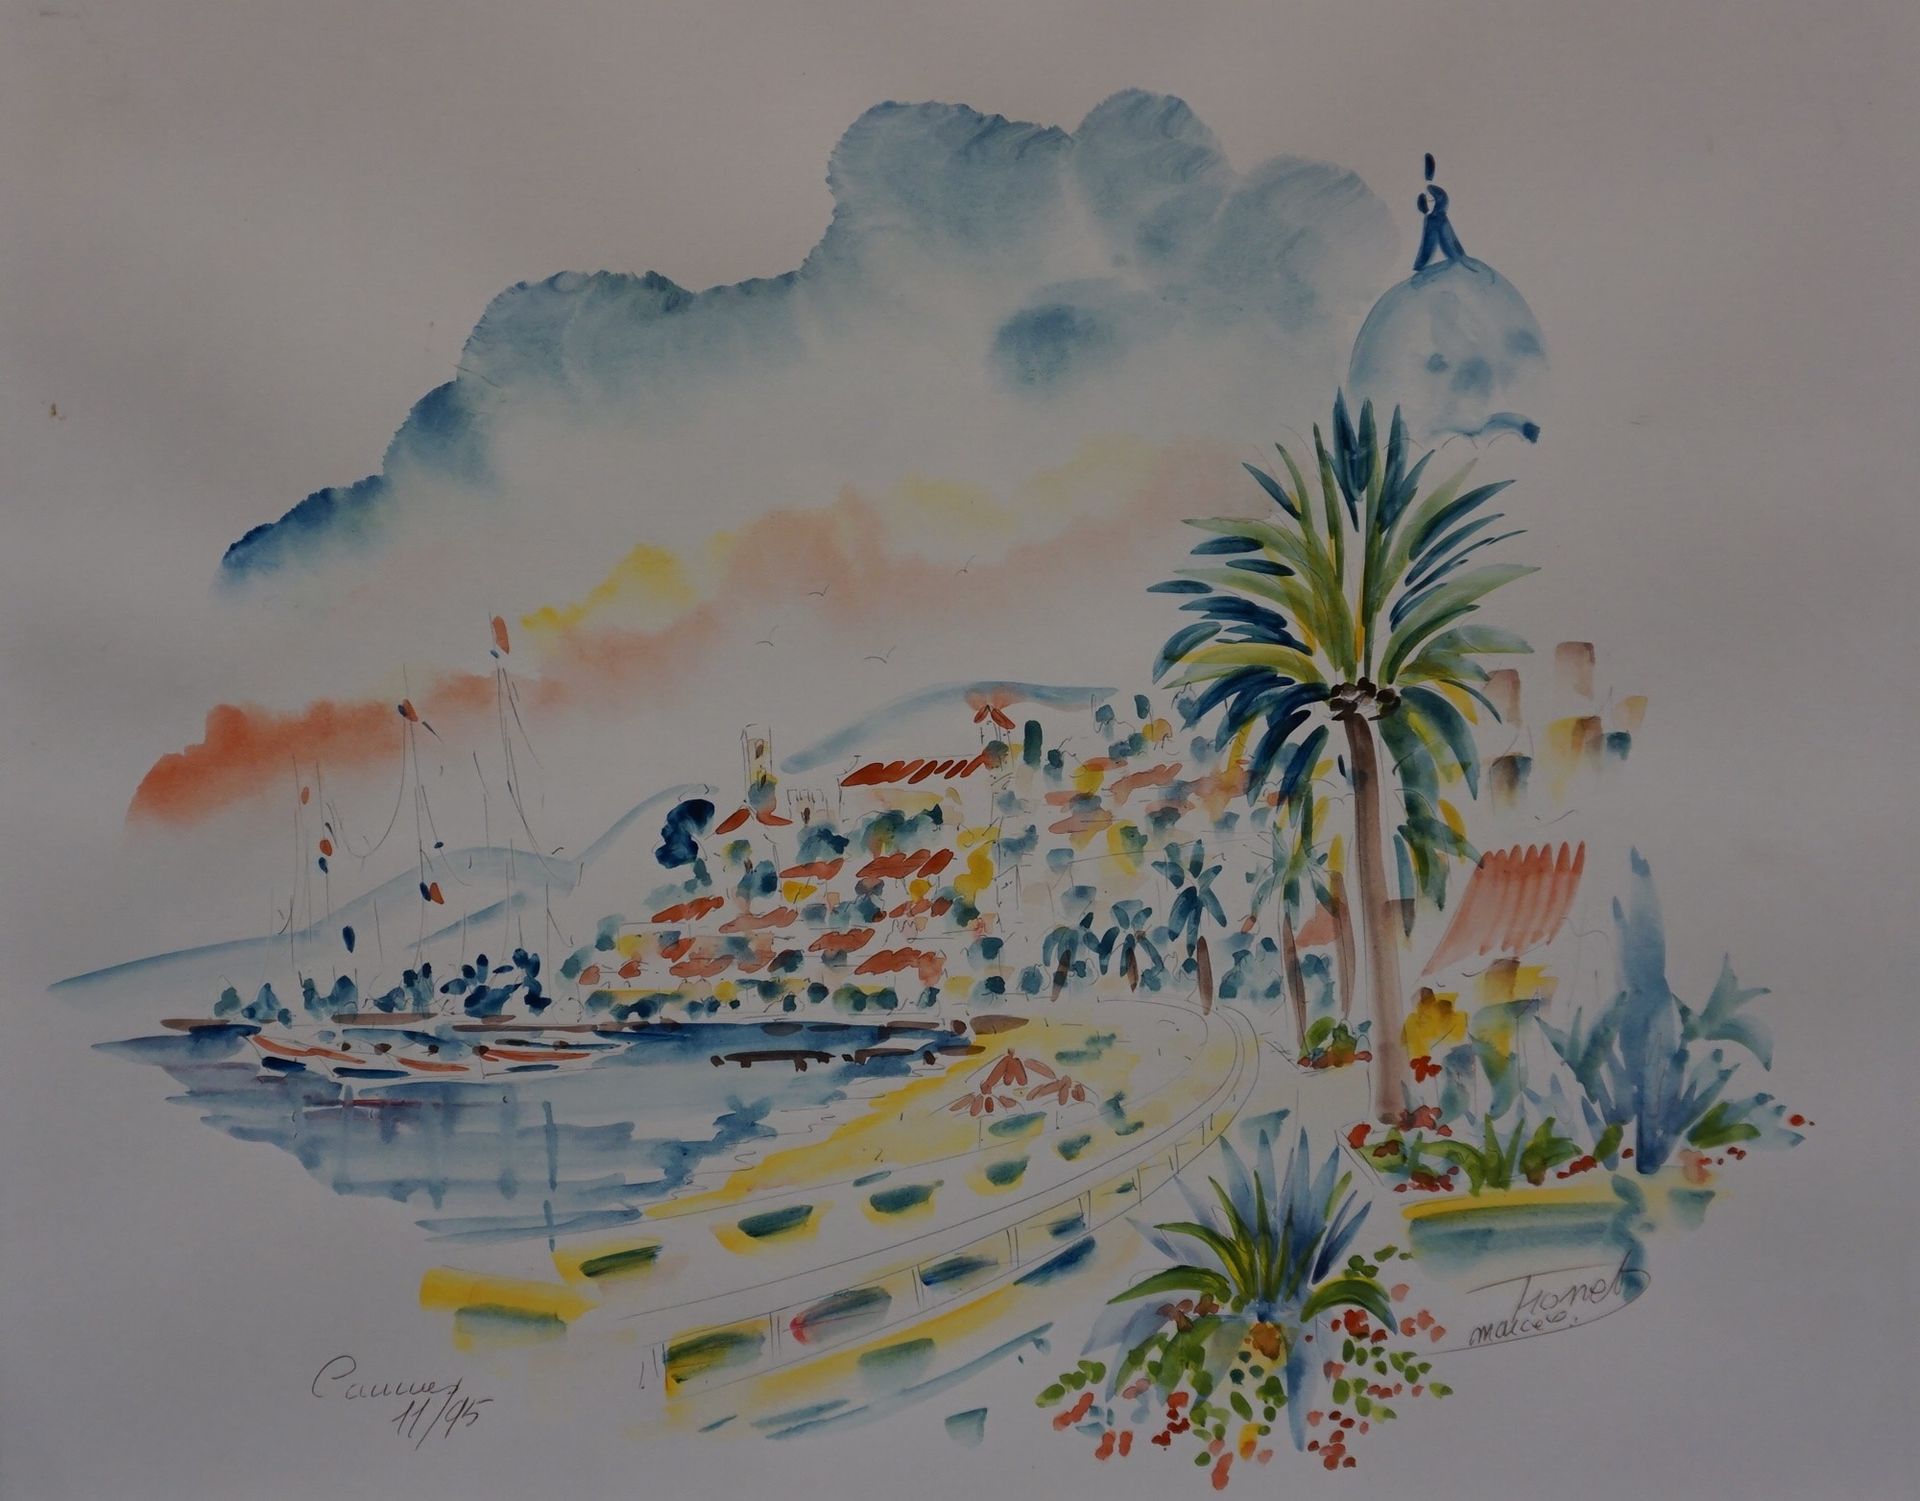 Marcel TRONET "View of Cannes", watercolor, sbd, dated 95. 40/50.